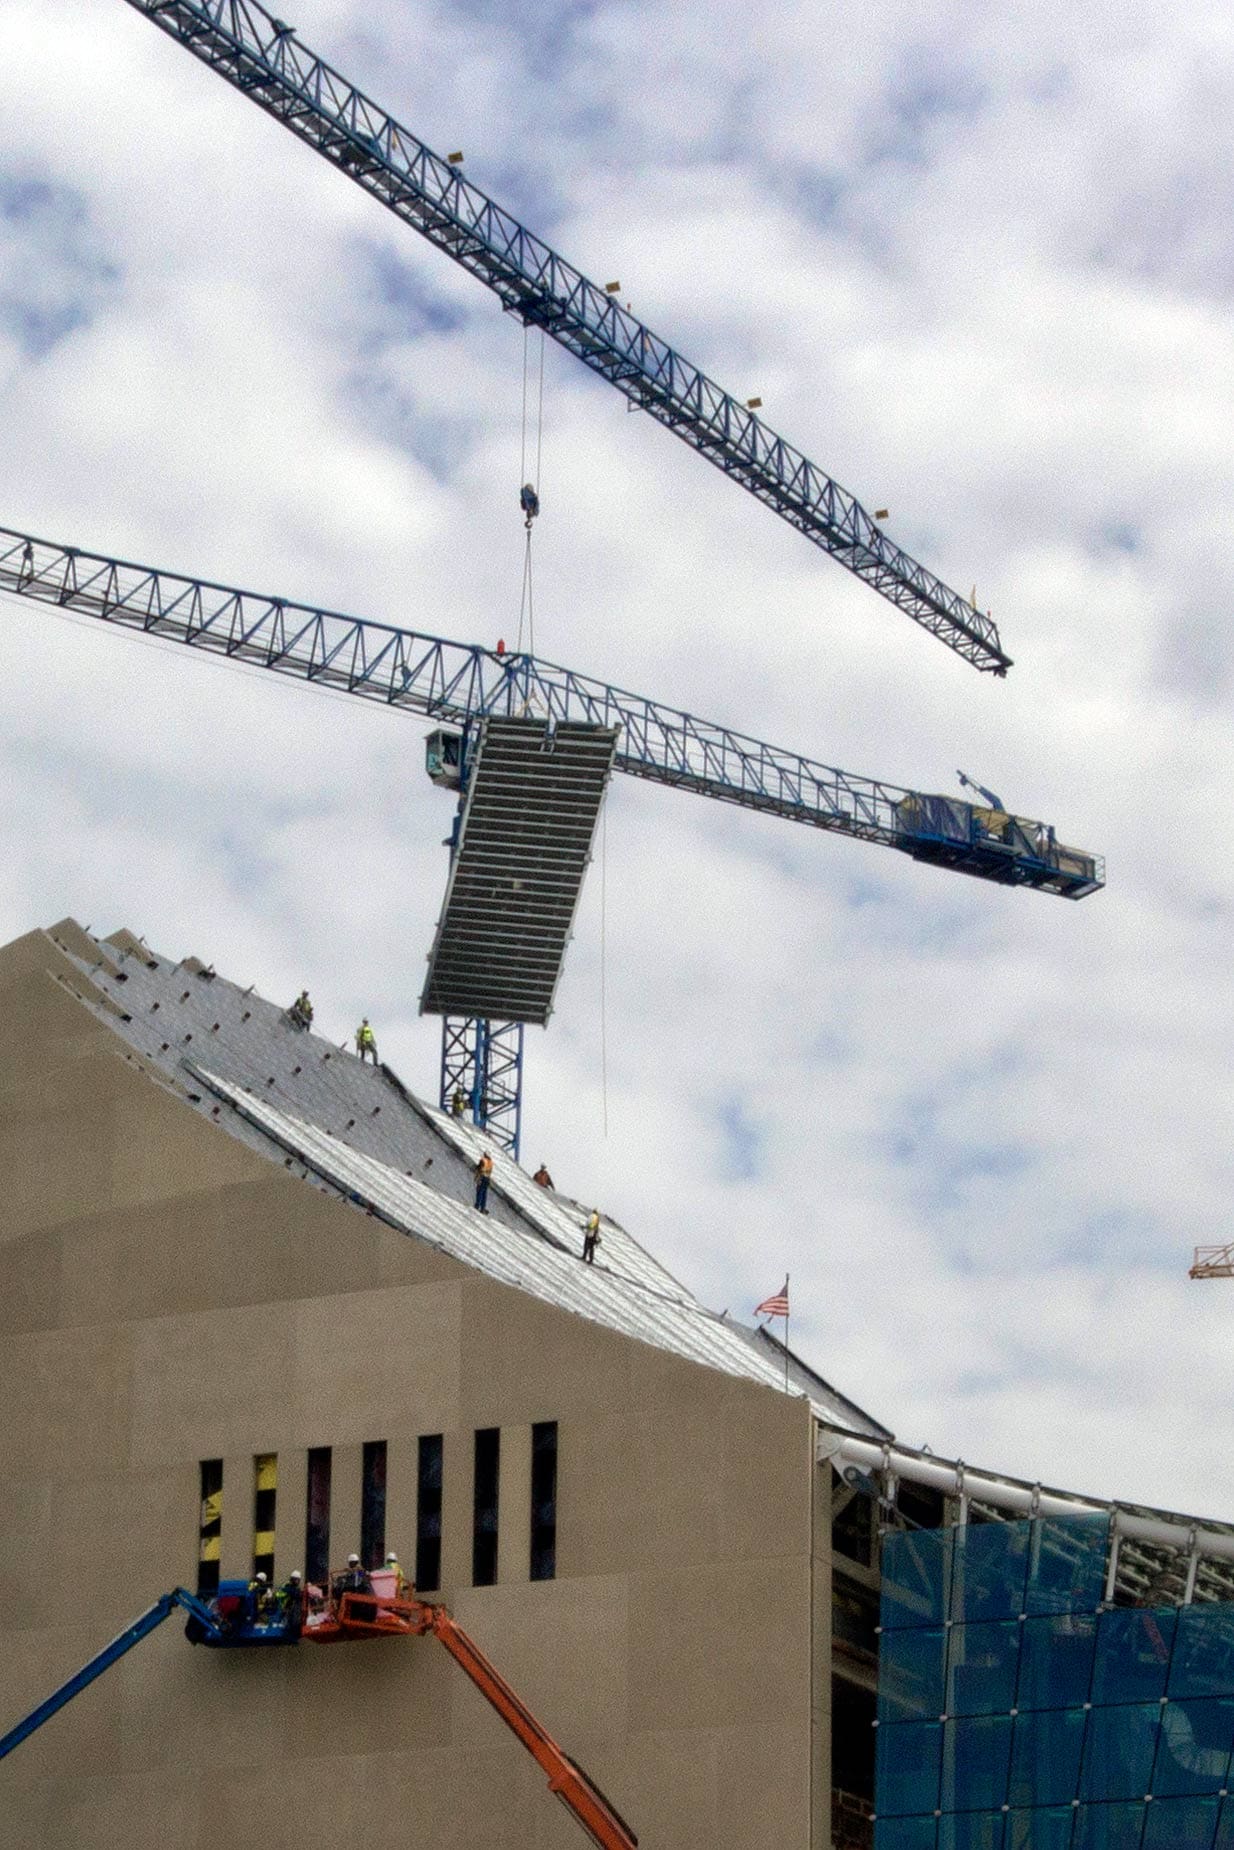 A single ZEPPS panel for the roof system is hung at Kauffman Center.